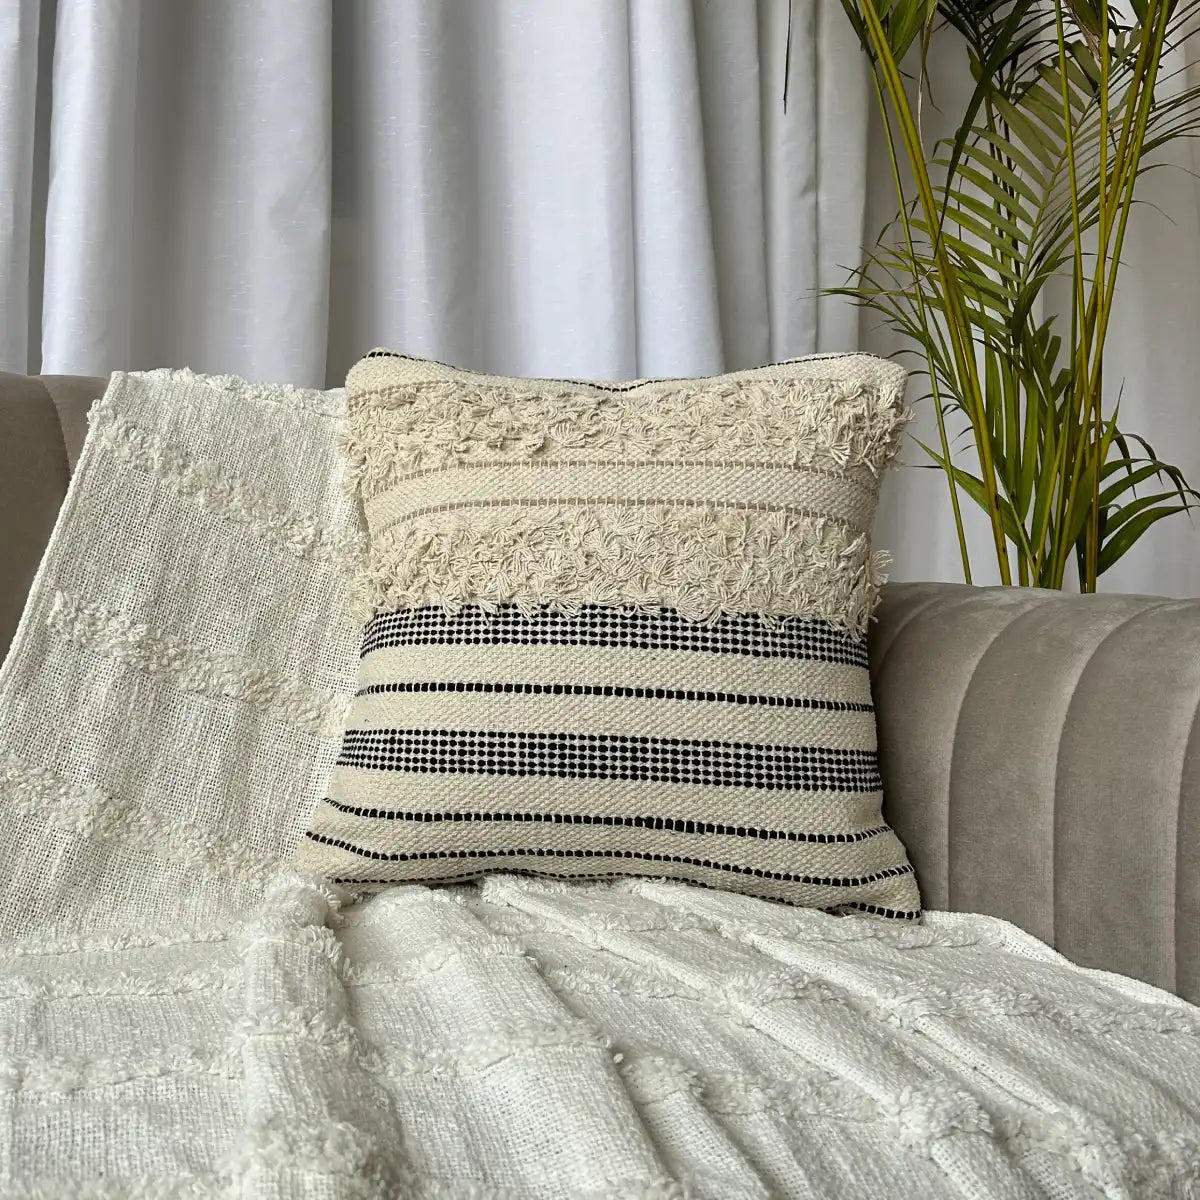 Chic 16x16 Inch Cotton Boho Pillowcase for Trendy Home Interiors